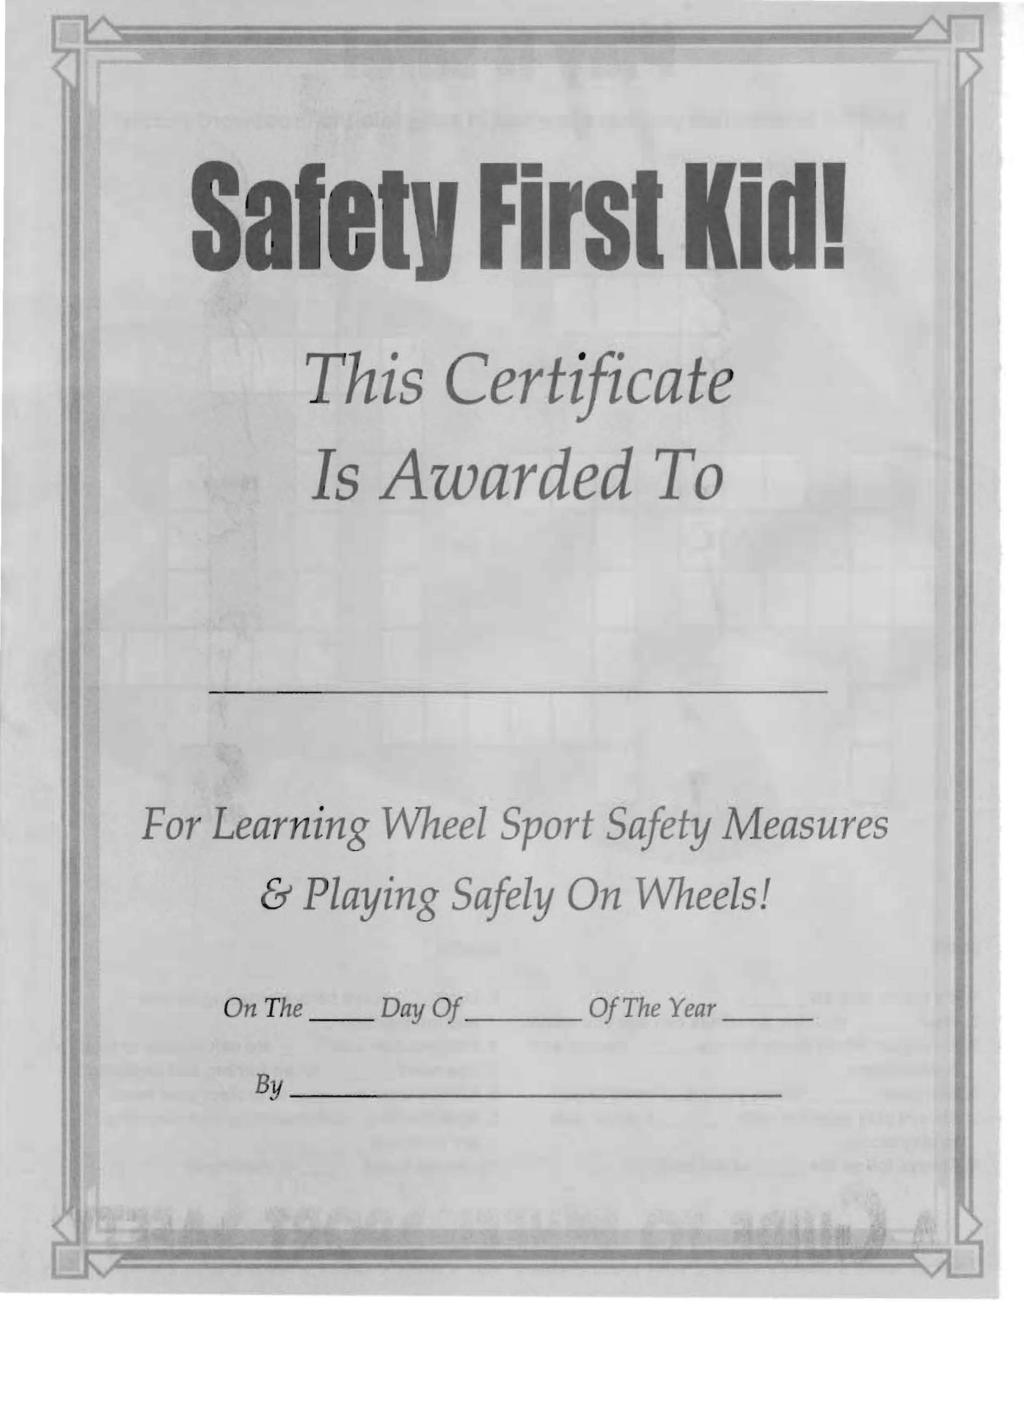 This Certificate Is Awarded To For Learning Wheel Sport Safety